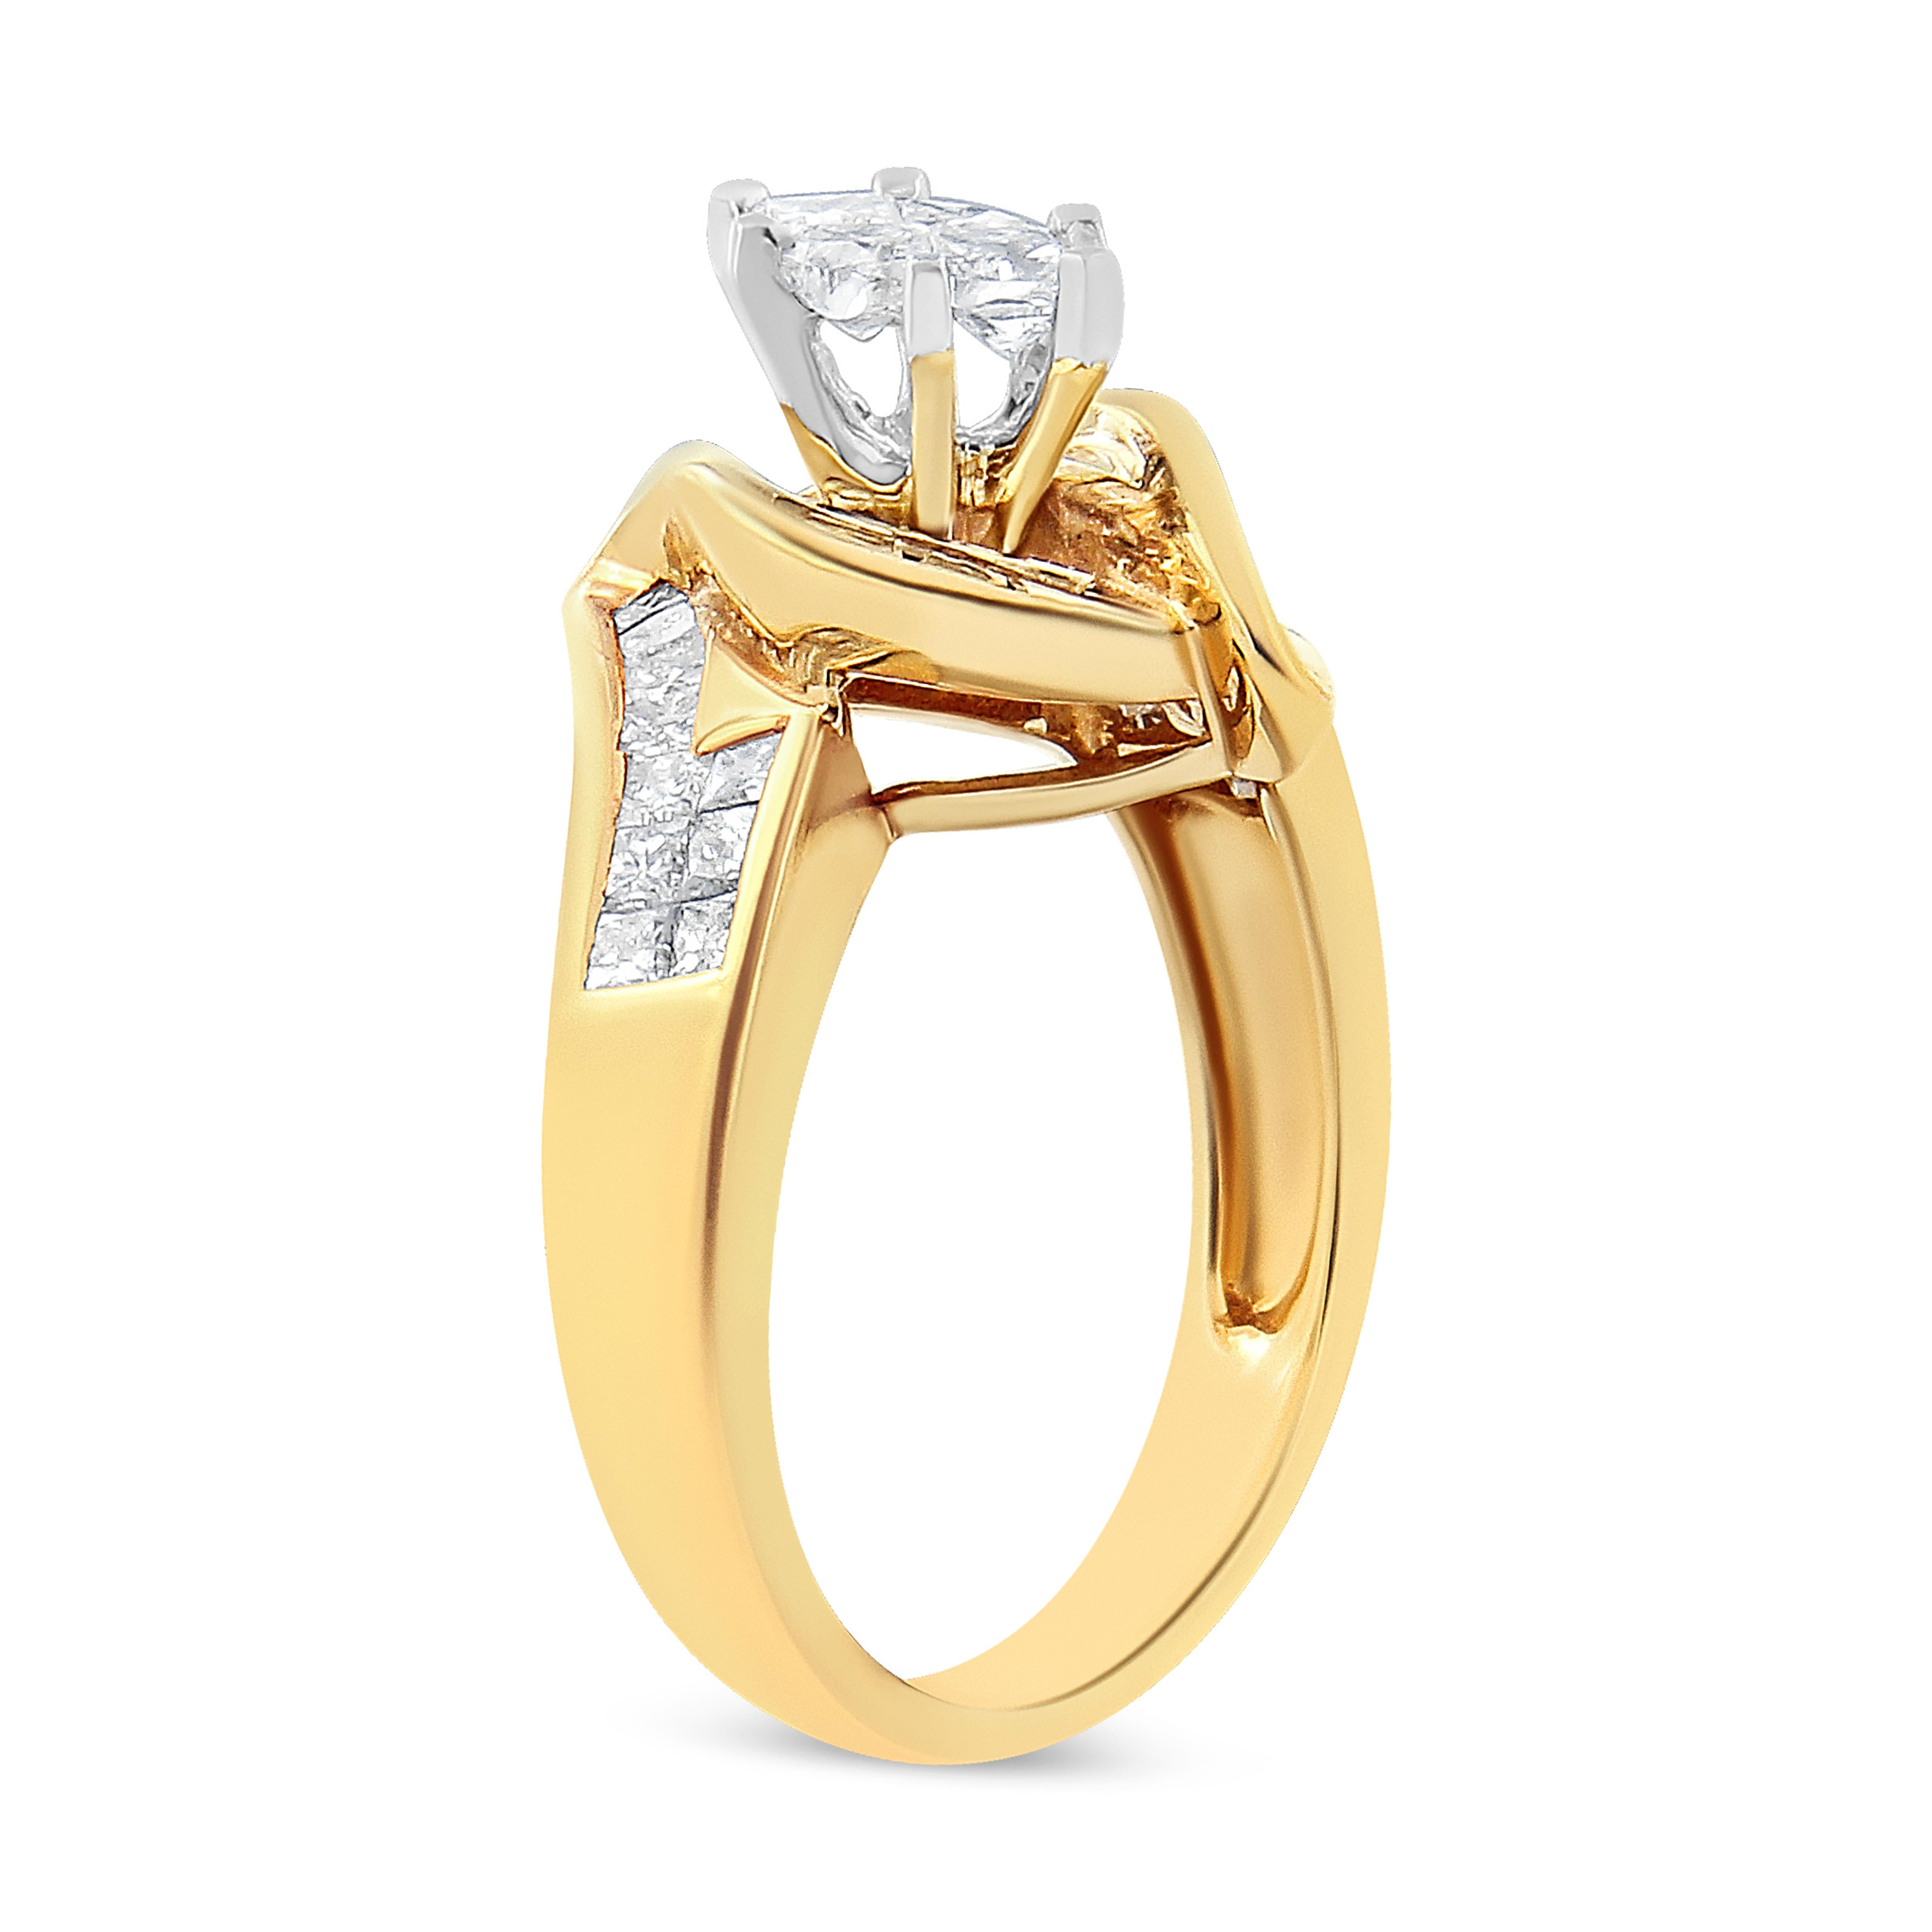 For Sale:  14K Yellow Gold 1 1/4 Carat Diamond Marquise Shaped Ring 5